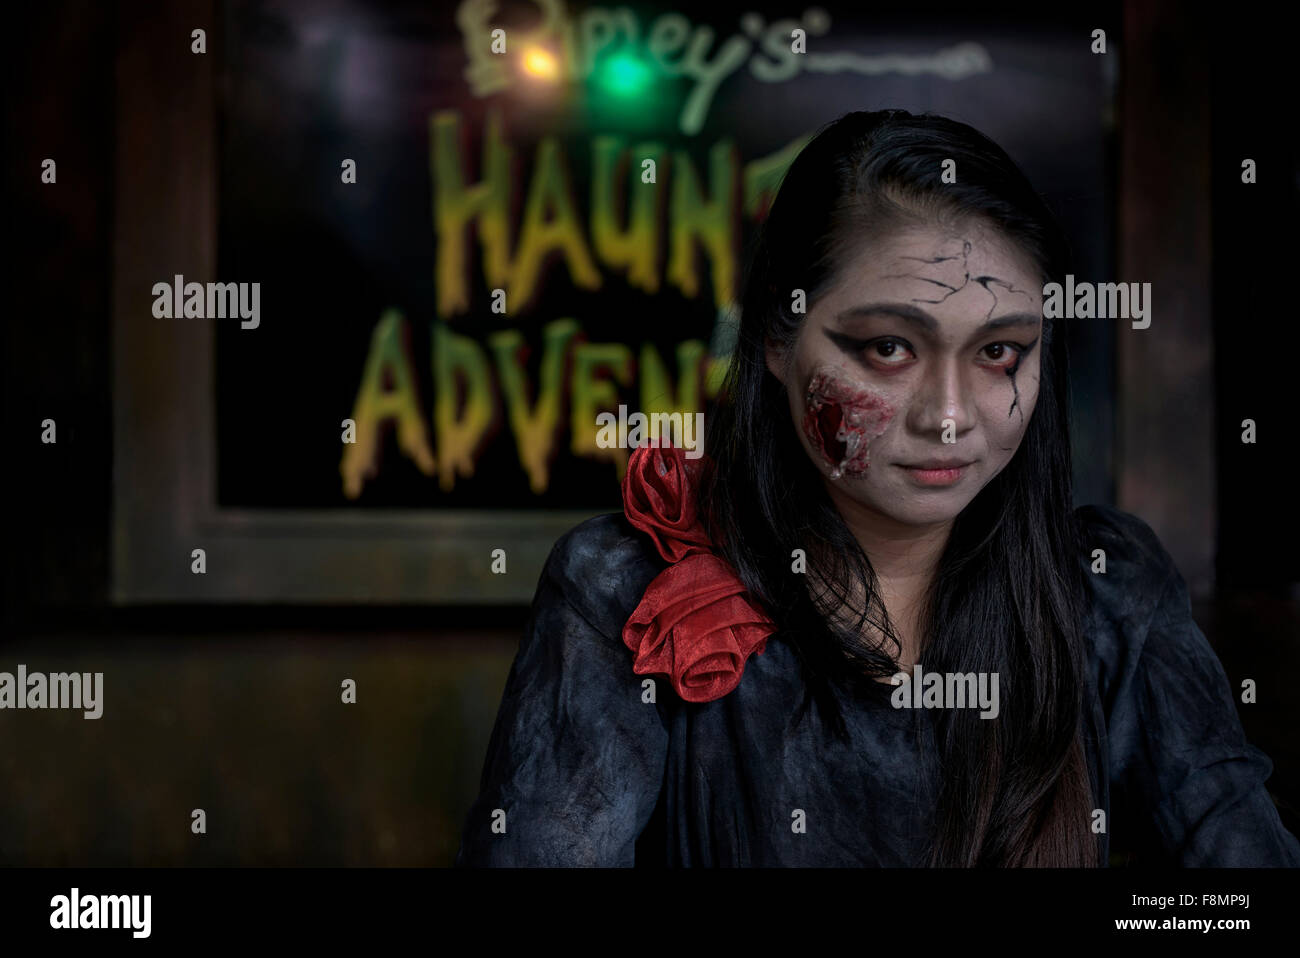 Zombie female. Staff member at Ripley's Believe it or Not horror show. Pattaya Thailand. Stock Photo